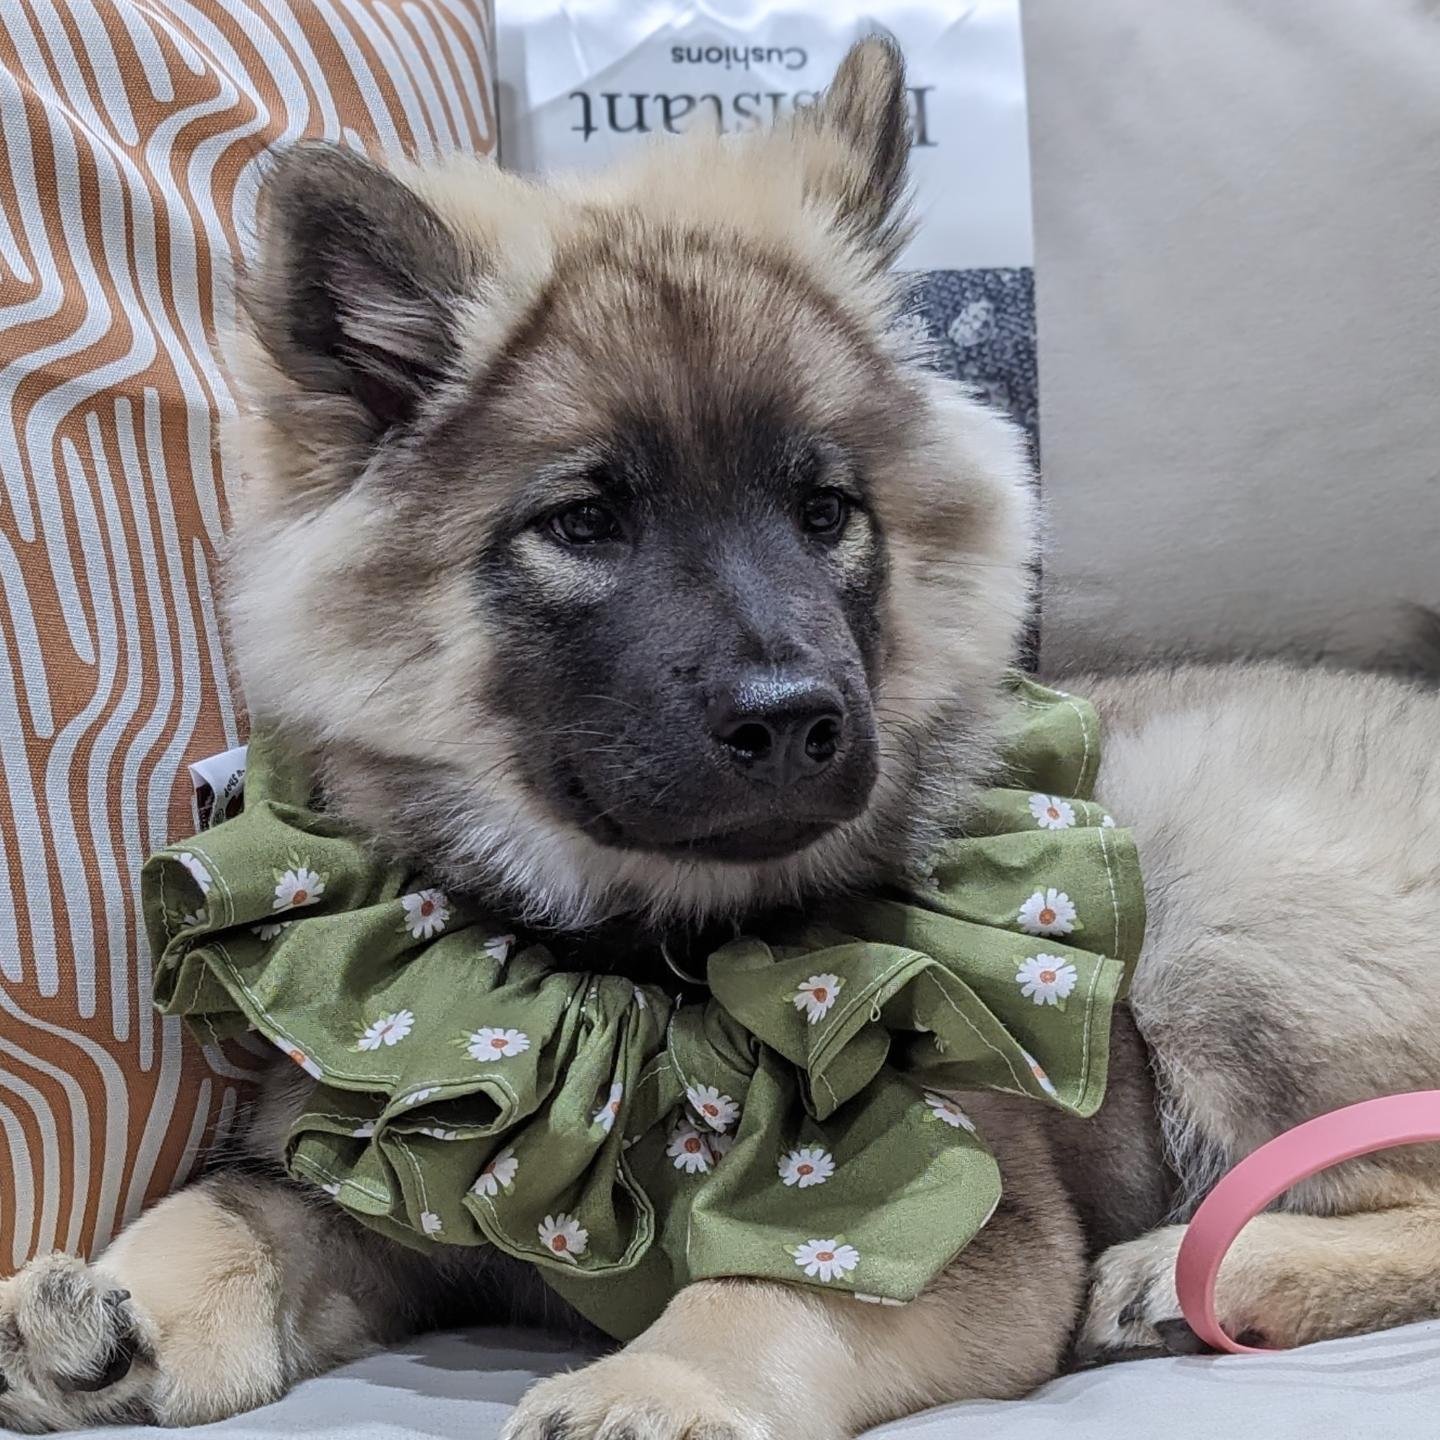 When you're just a baby but you wear your mom's clothes 🧣 because you insist that you're a big girl now 😤
.
.
.
#eurasier #eurasiersofinstagram #eurasiersofnorthamerica #useurasier #eurasierlove #eurasierlife #dogsofinstagram #instadog #akcfss #akc